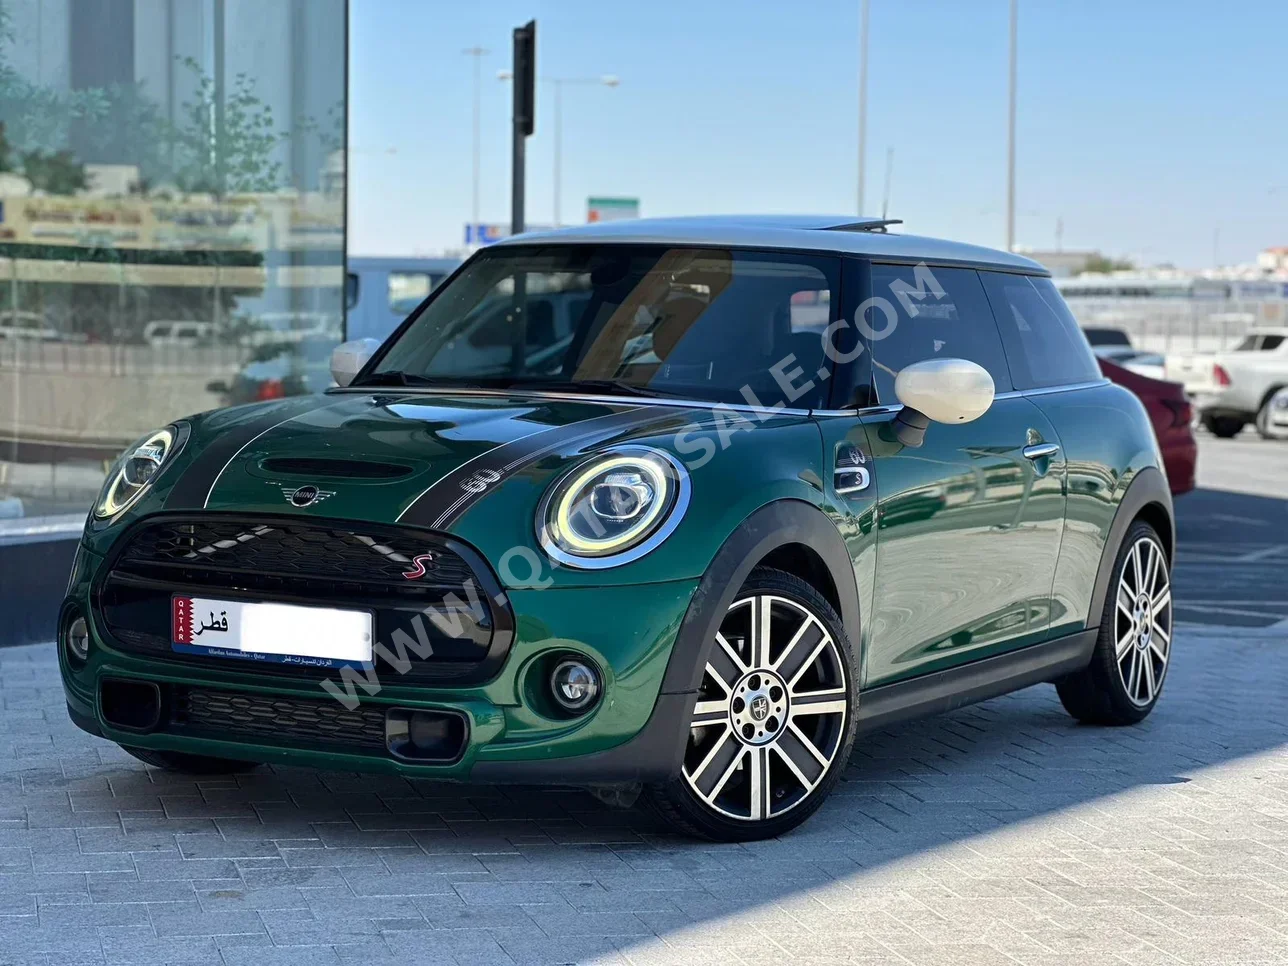 Mini  Cooper  S  2020  Automatic  35,000 Km  4 Cylinder  Front Wheel Drive (FWD)  Hatchback  Green  With Warranty